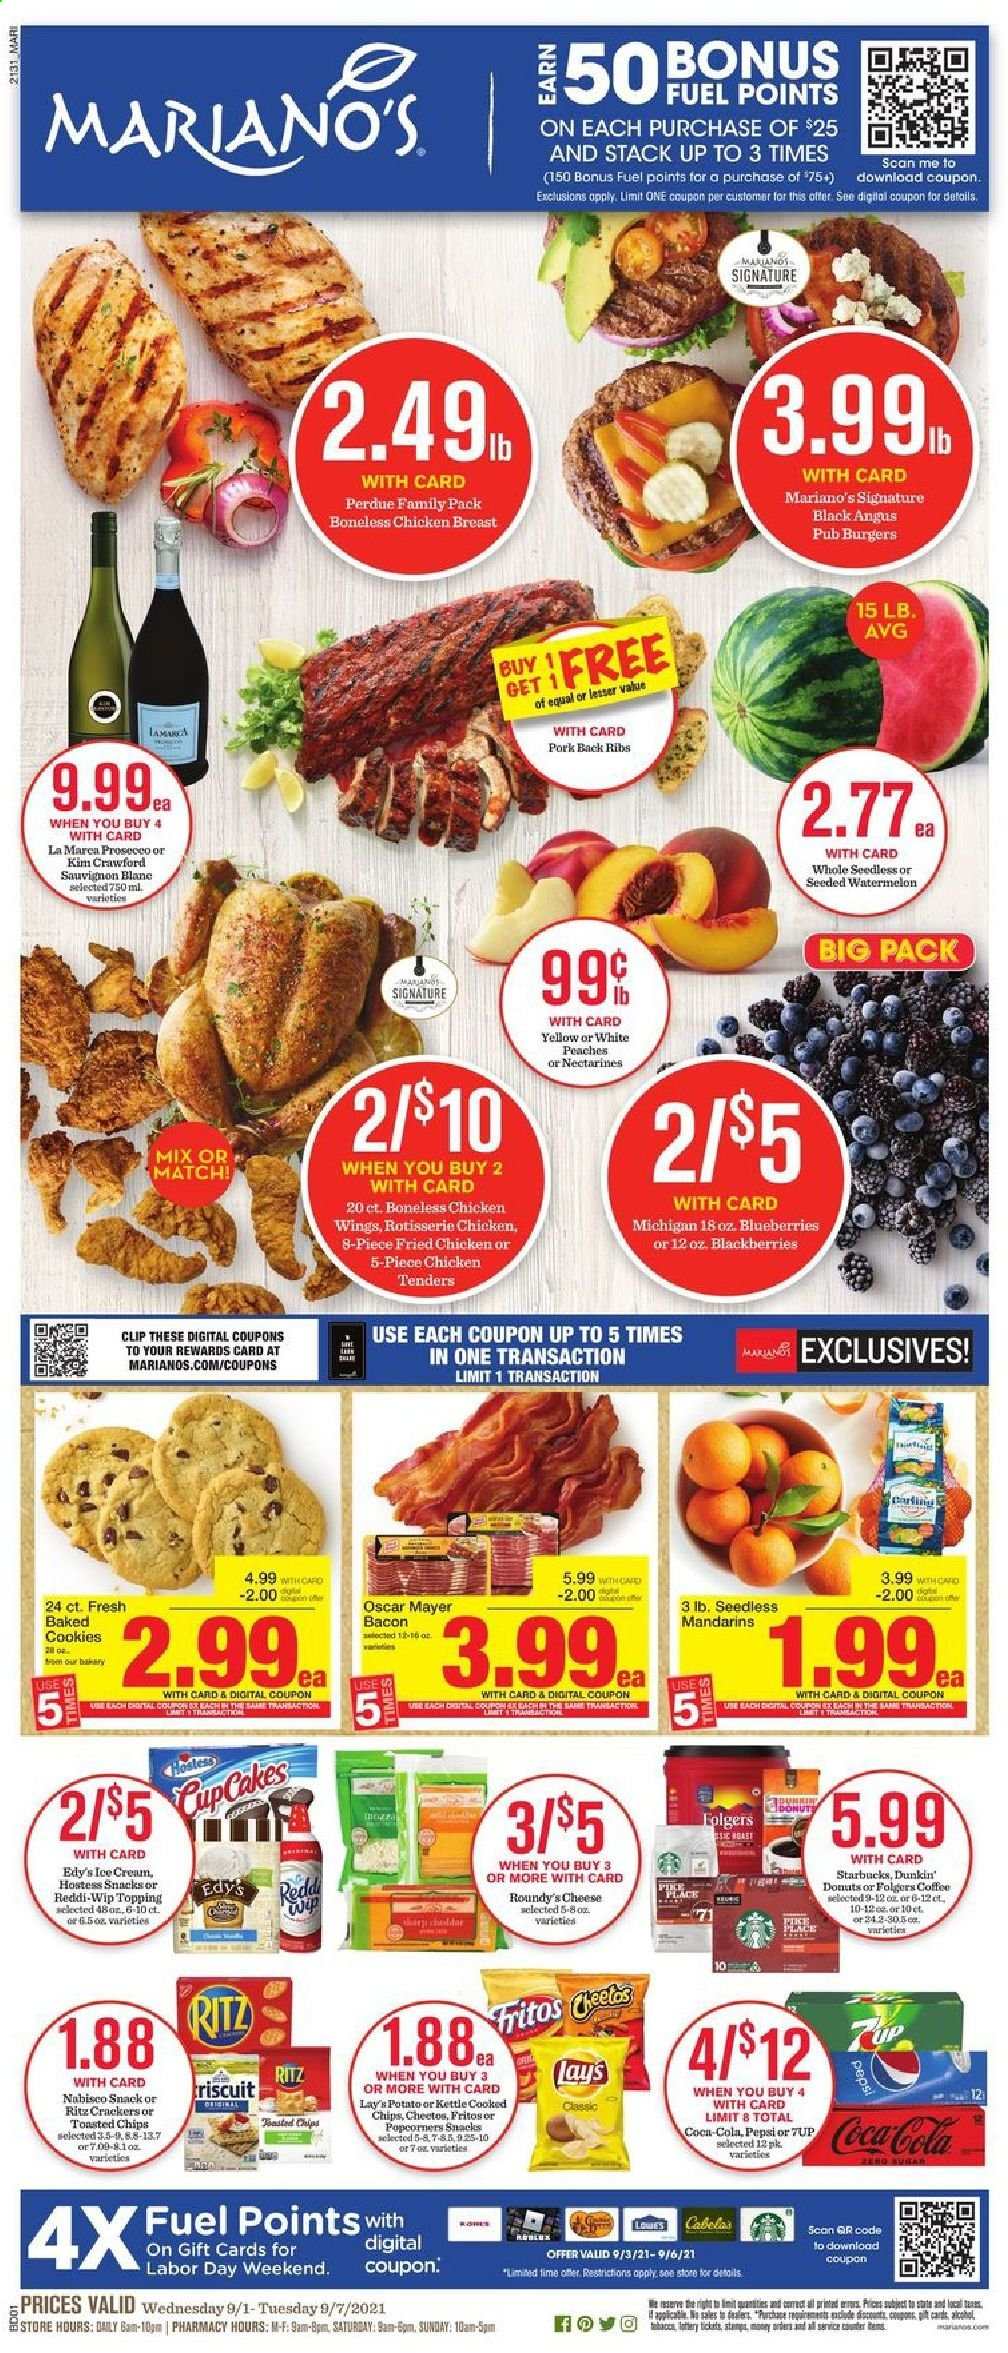 thumbnail - Mariano’s Flyer - 09/01/2021 - 09/07/2021 - Sales products - cupcake, donut, blackberries, blueberries, mandarines, watermelon, chicken roast, chicken tenders, hamburger, fried chicken, Perdue®, bacon, Oscar Mayer, cheese, chicken wings, cookies, snack, RITZ, Fritos, chips, Lay’s, popcorn, topping, Coca-Cola, Pepsi, 7UP, coffee, Starbucks, Folgers, prosecco, Sauvignon Blanc, chicken breasts, pork meat, pork ribs, pork back ribs, nectarines, peaches. Page 1.